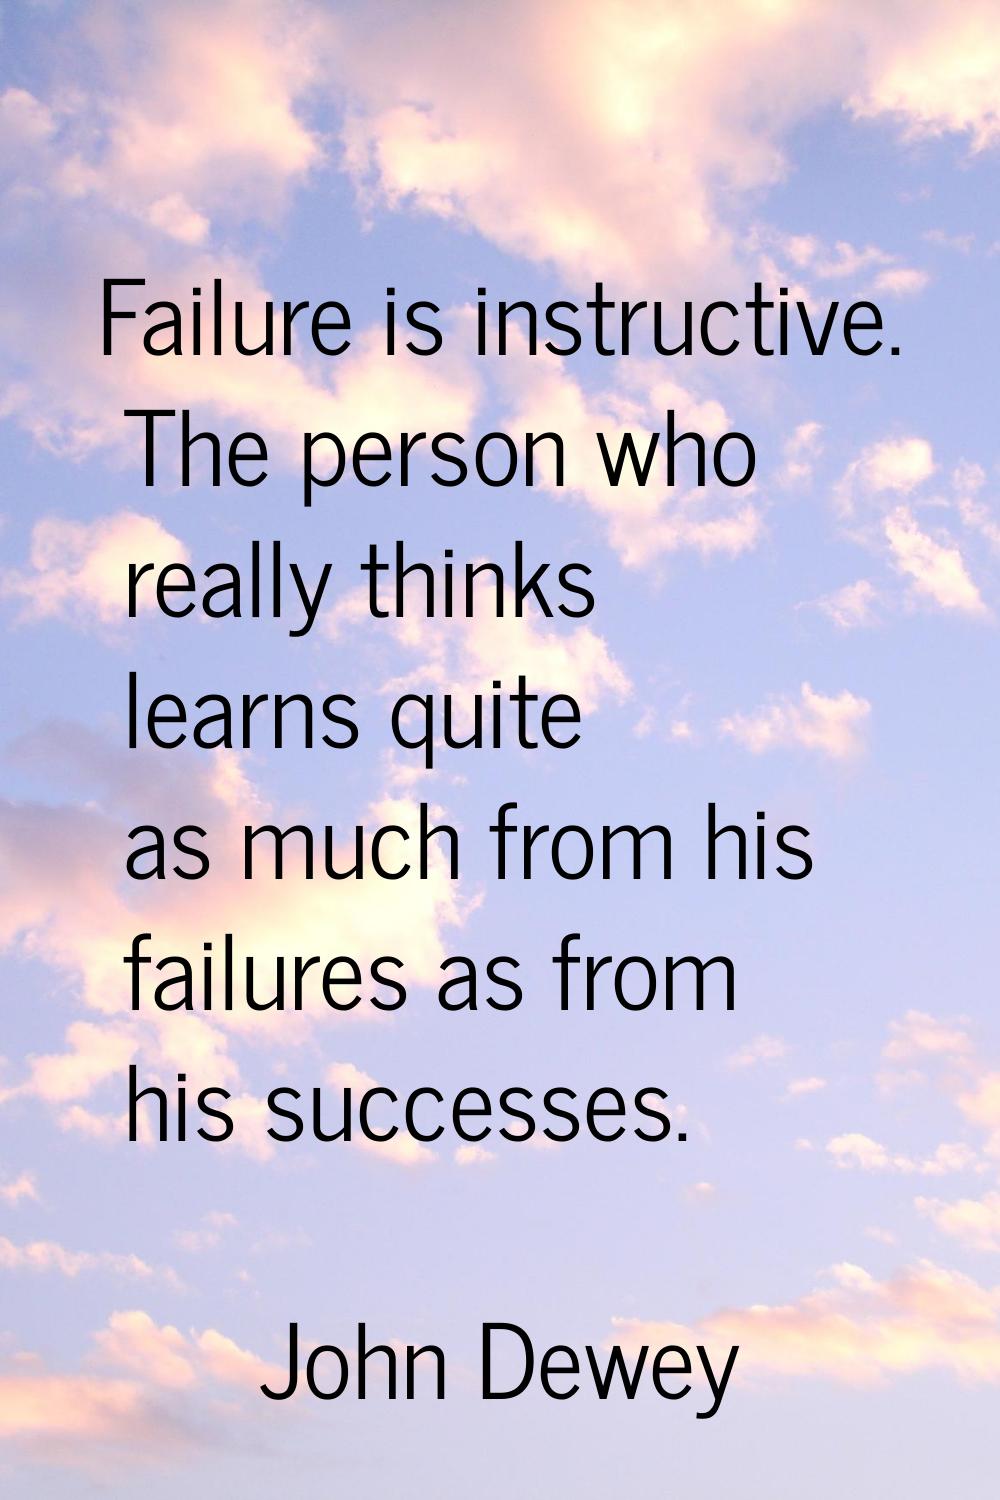 Failure is instructive. The person who really thinks learns quite as much from his failures as from